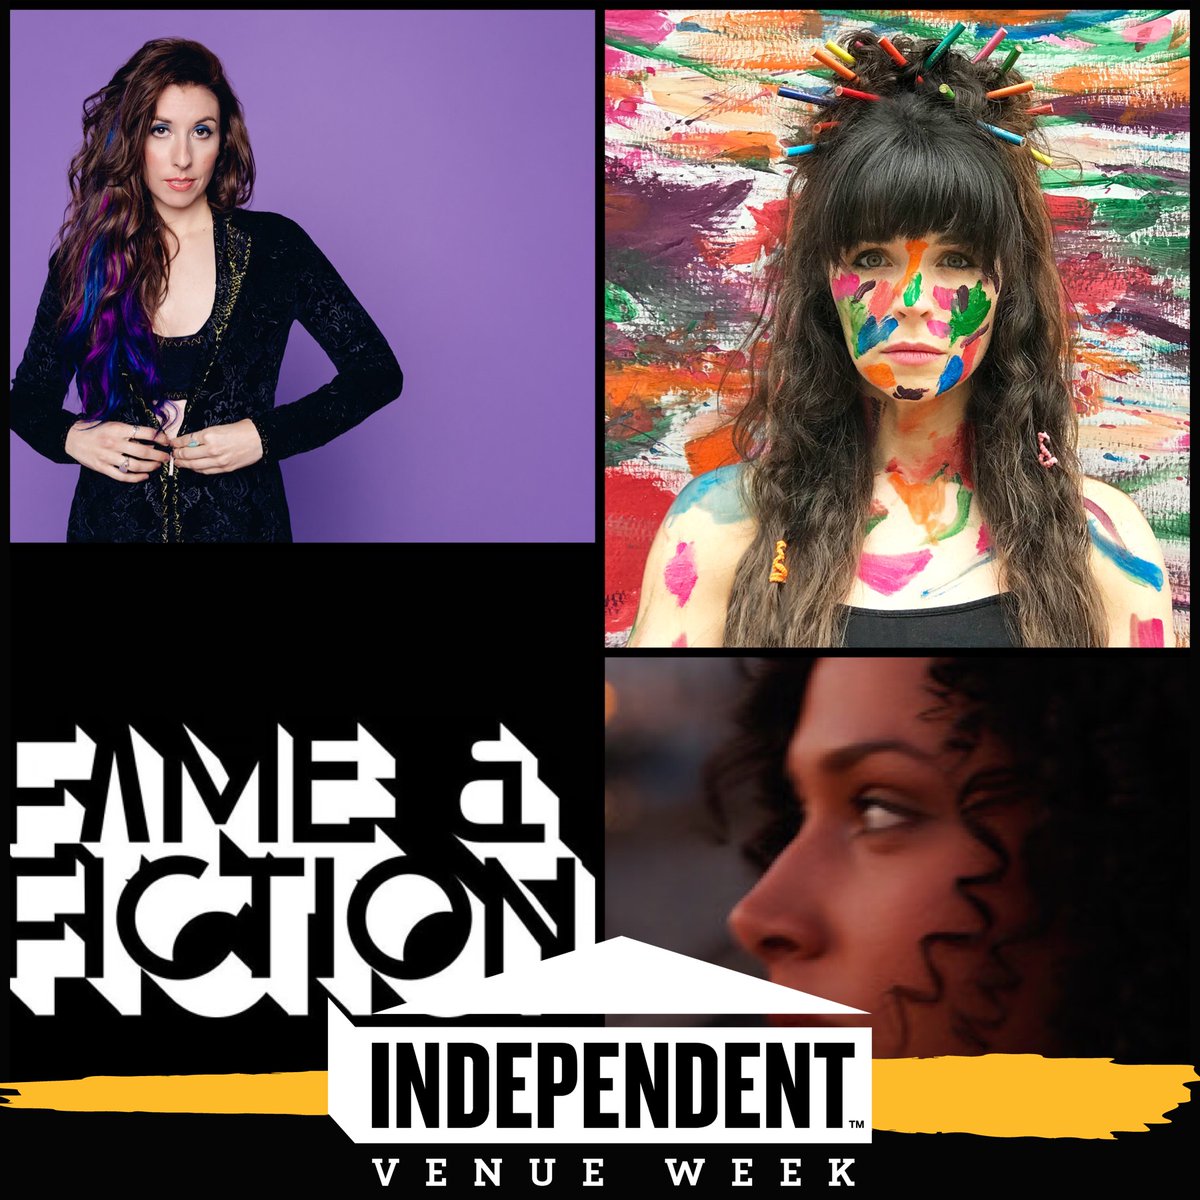 it's finally Independent Venue Week! EXIT/IN is proud to participate w venues all across the country in celebrating the spirit of independence #IVW21 🌟 🎟: exitin.com 7/15 @MrMatt_Daughtry 7/16 @certainly_so 7/17 @AlannaRoyale 7/18 Fame & Fiction & @jenningsmusic